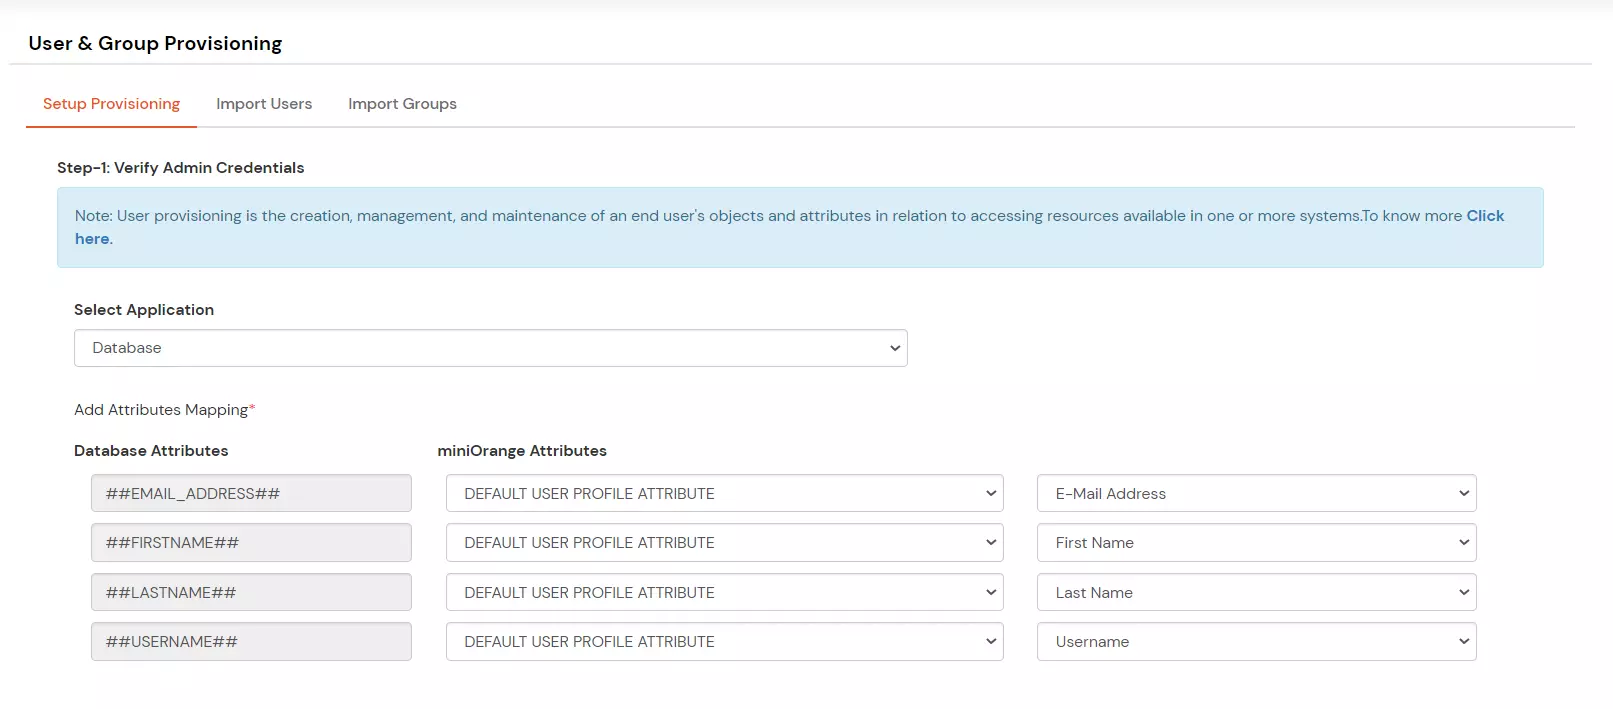 Configure Maria Database Provisioning: Default User Profile Attributes mapping list